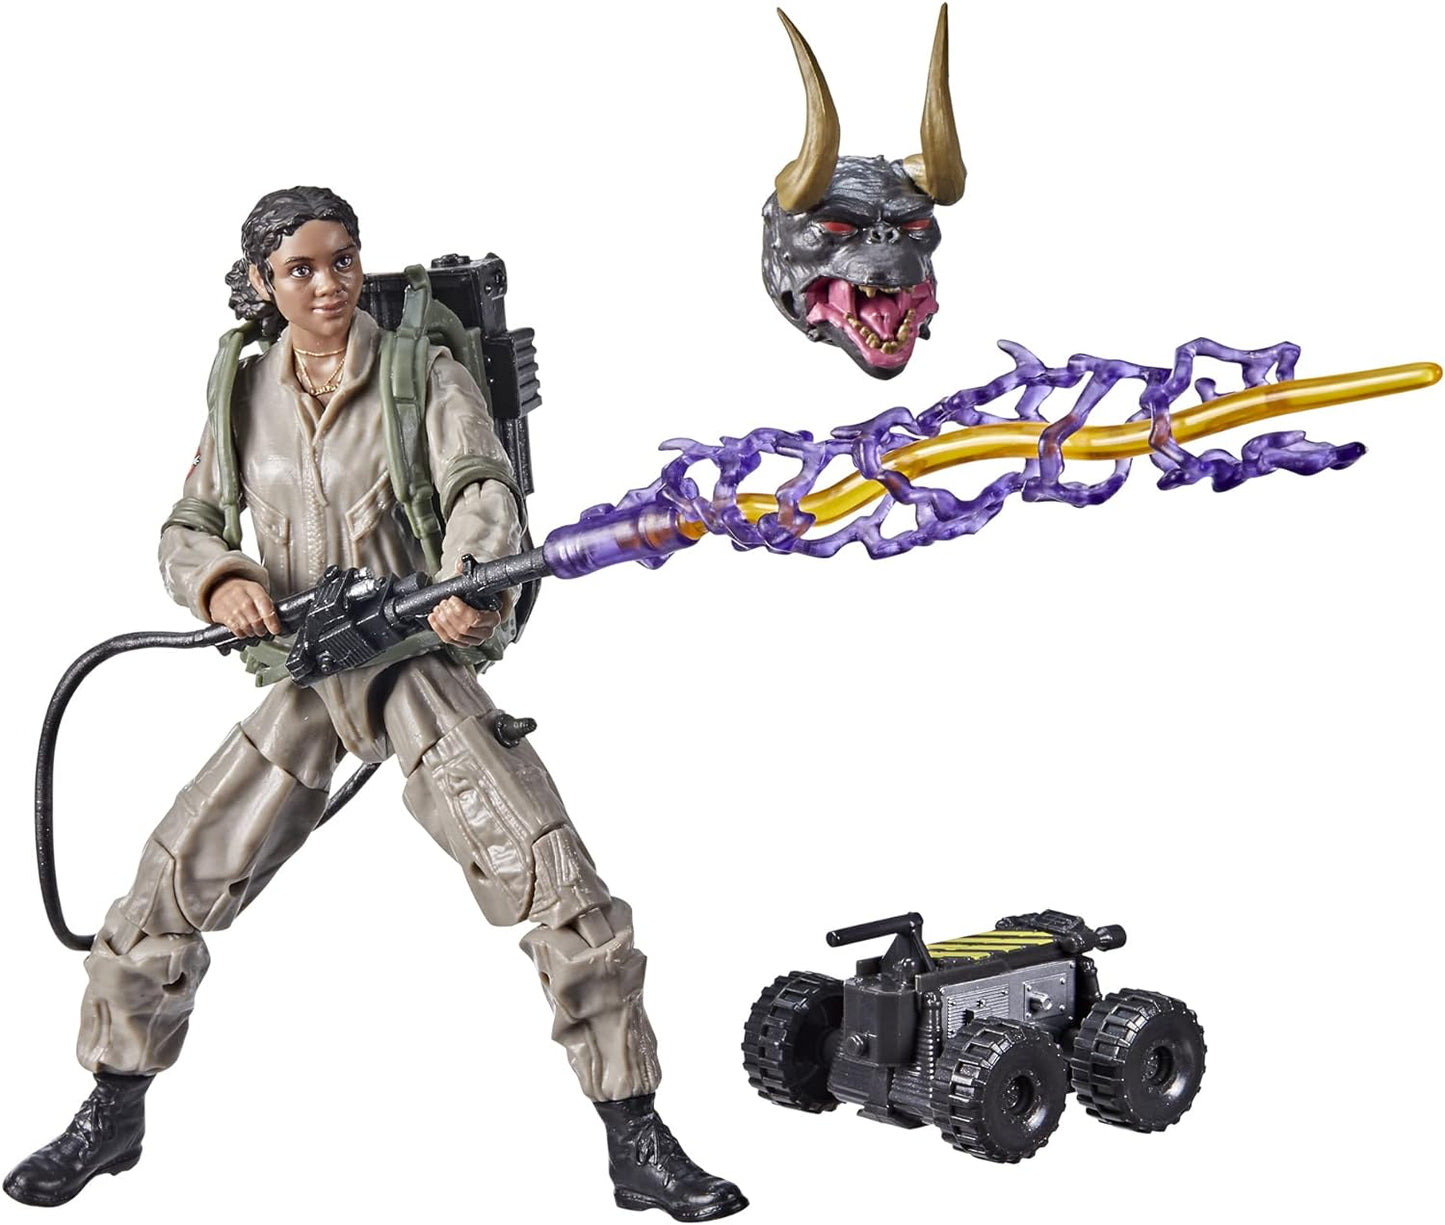 GHOSTBUSTERS: LUCKY - HASBRO-PLASMA SERIES-AFTERLIFE